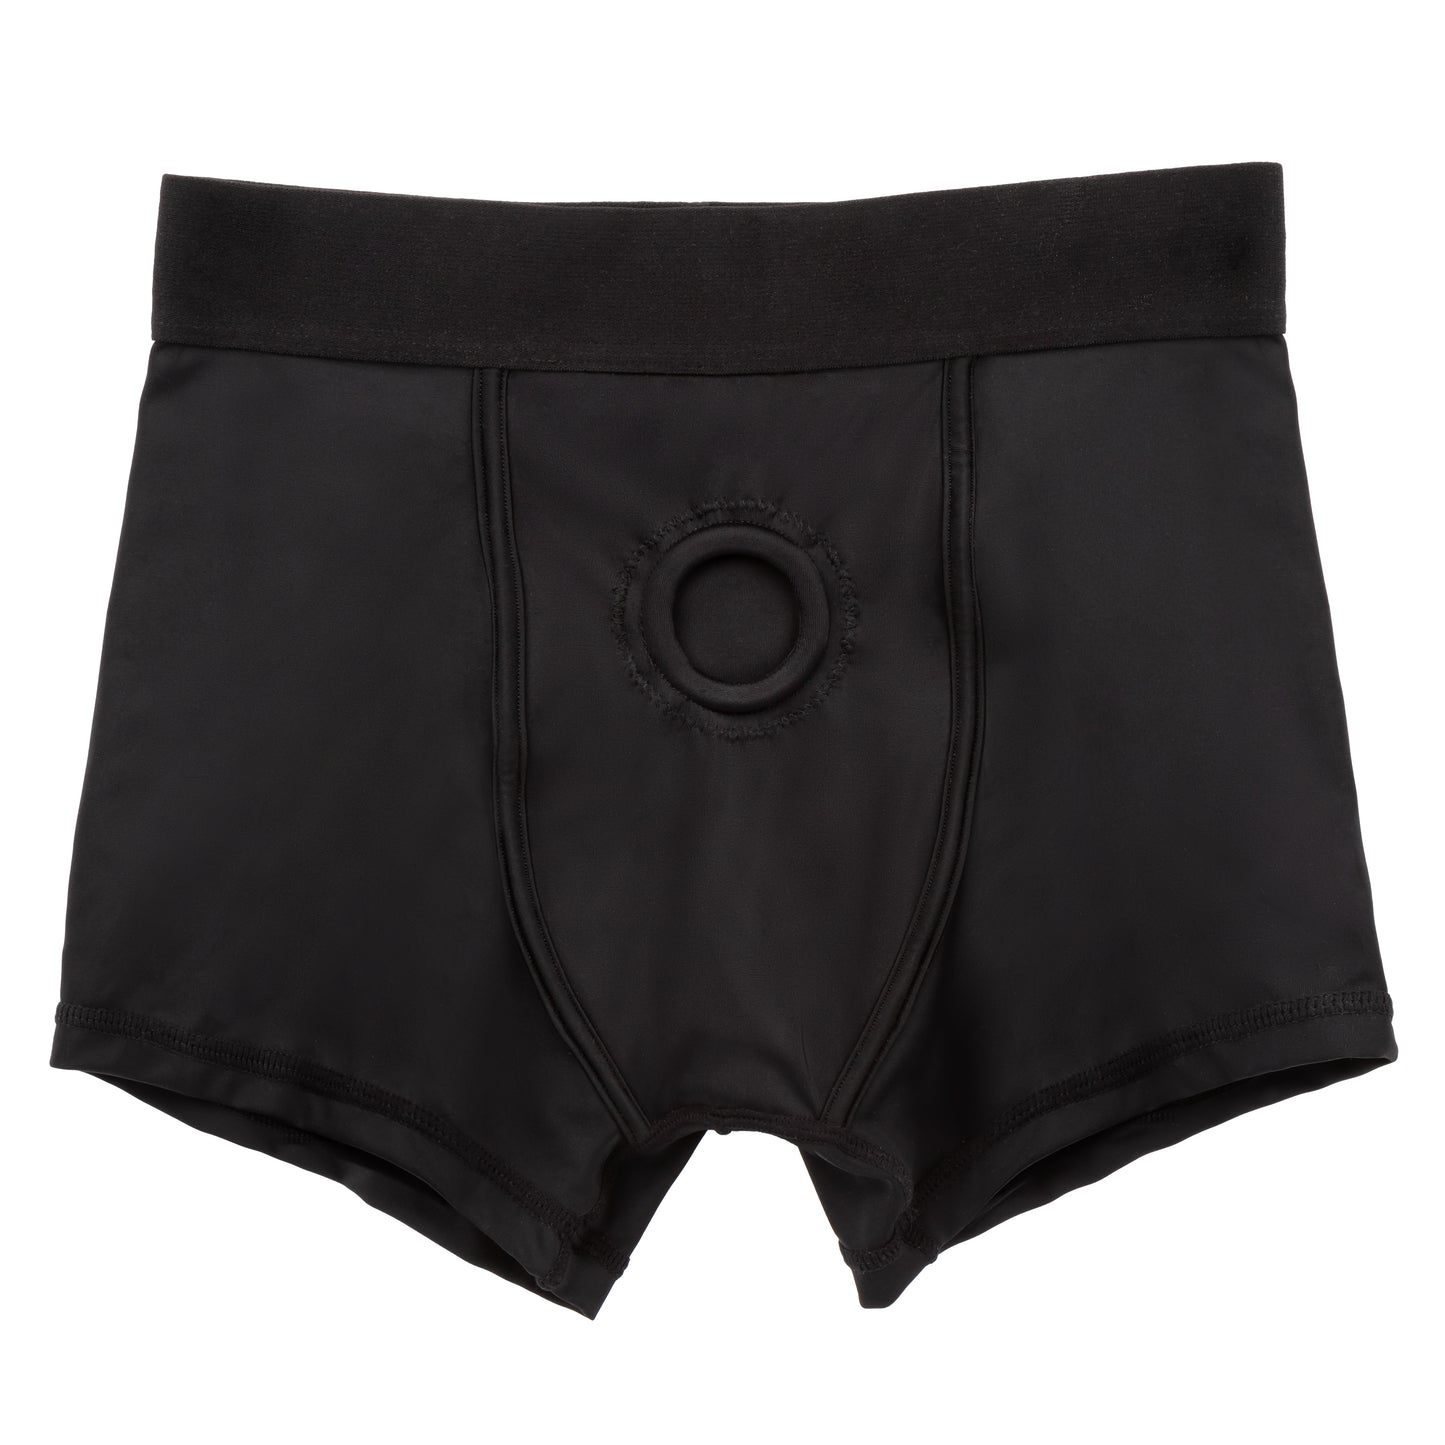 Her Royal Harness Boxer Brief - L/xl